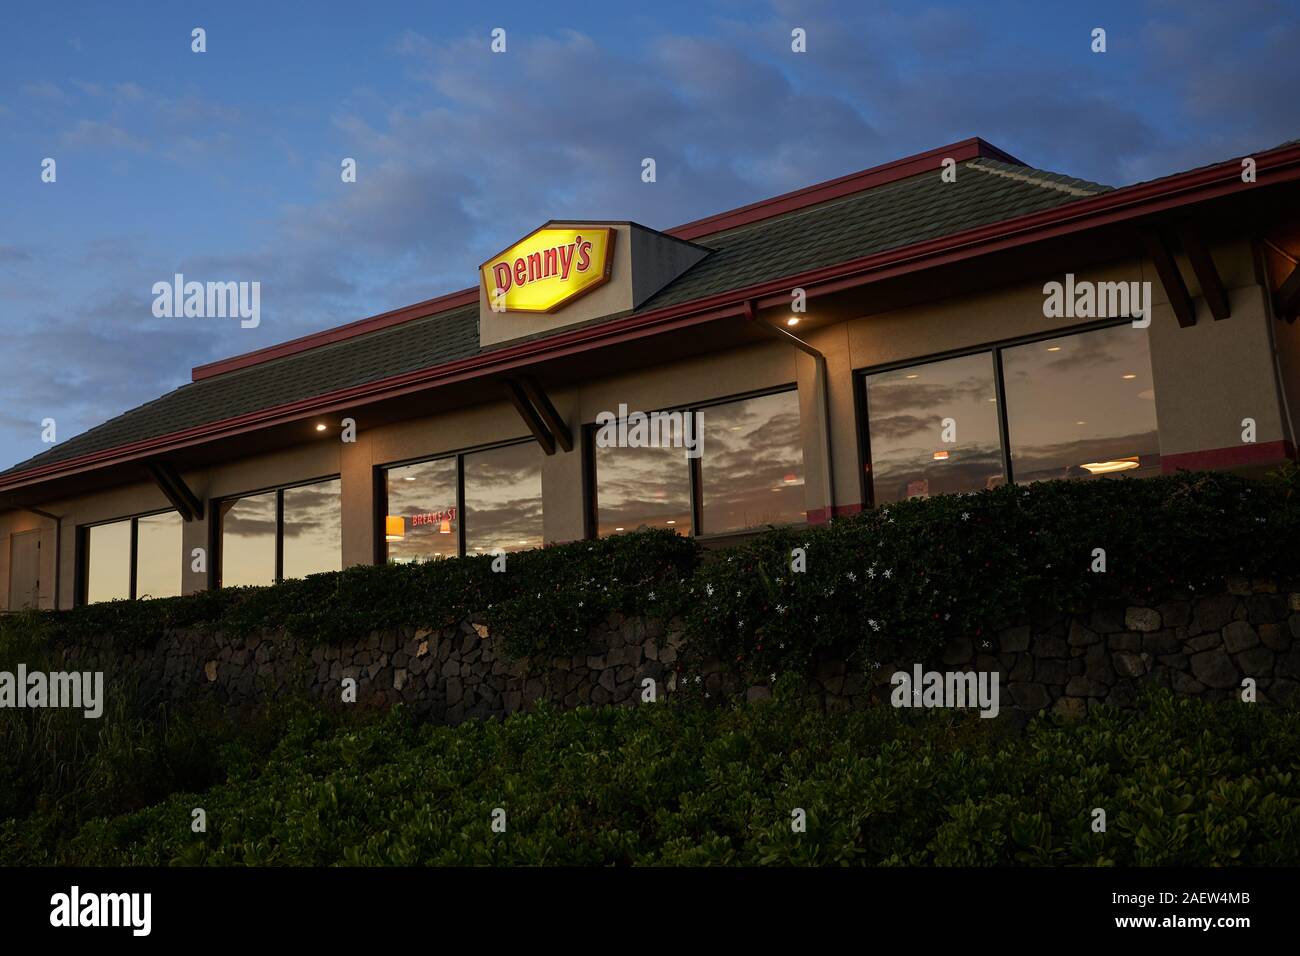 Kailua-Kona, Hawaii, USA - Nov 28, 2019: A Denny's restaurant in the evening. Denny's is an American table service diner-style restaurant chain. Stock Photo